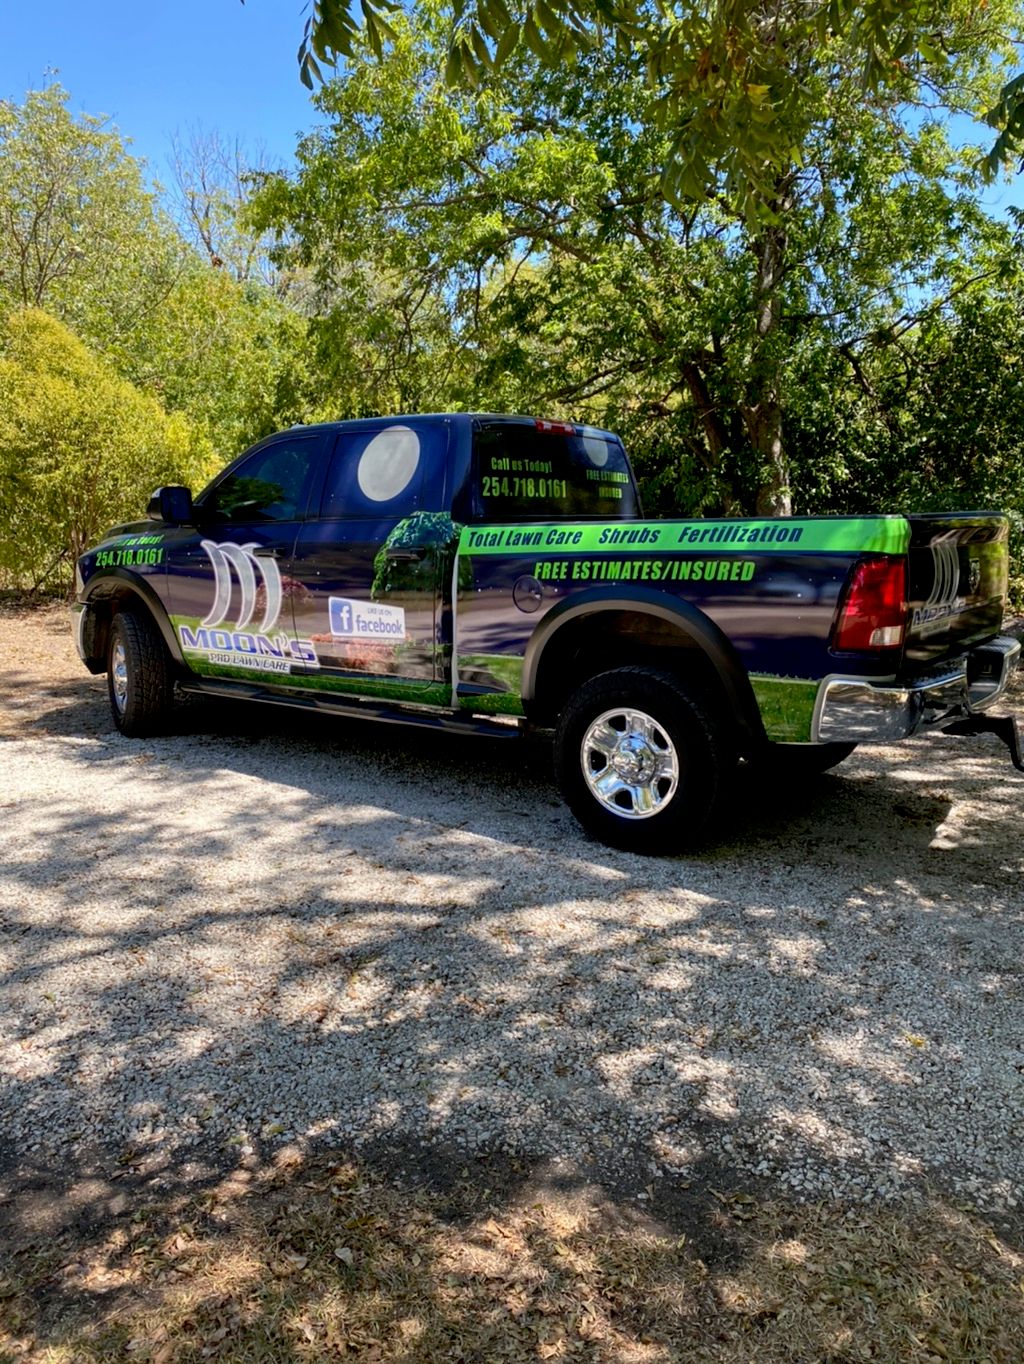 Moons pro lawn care